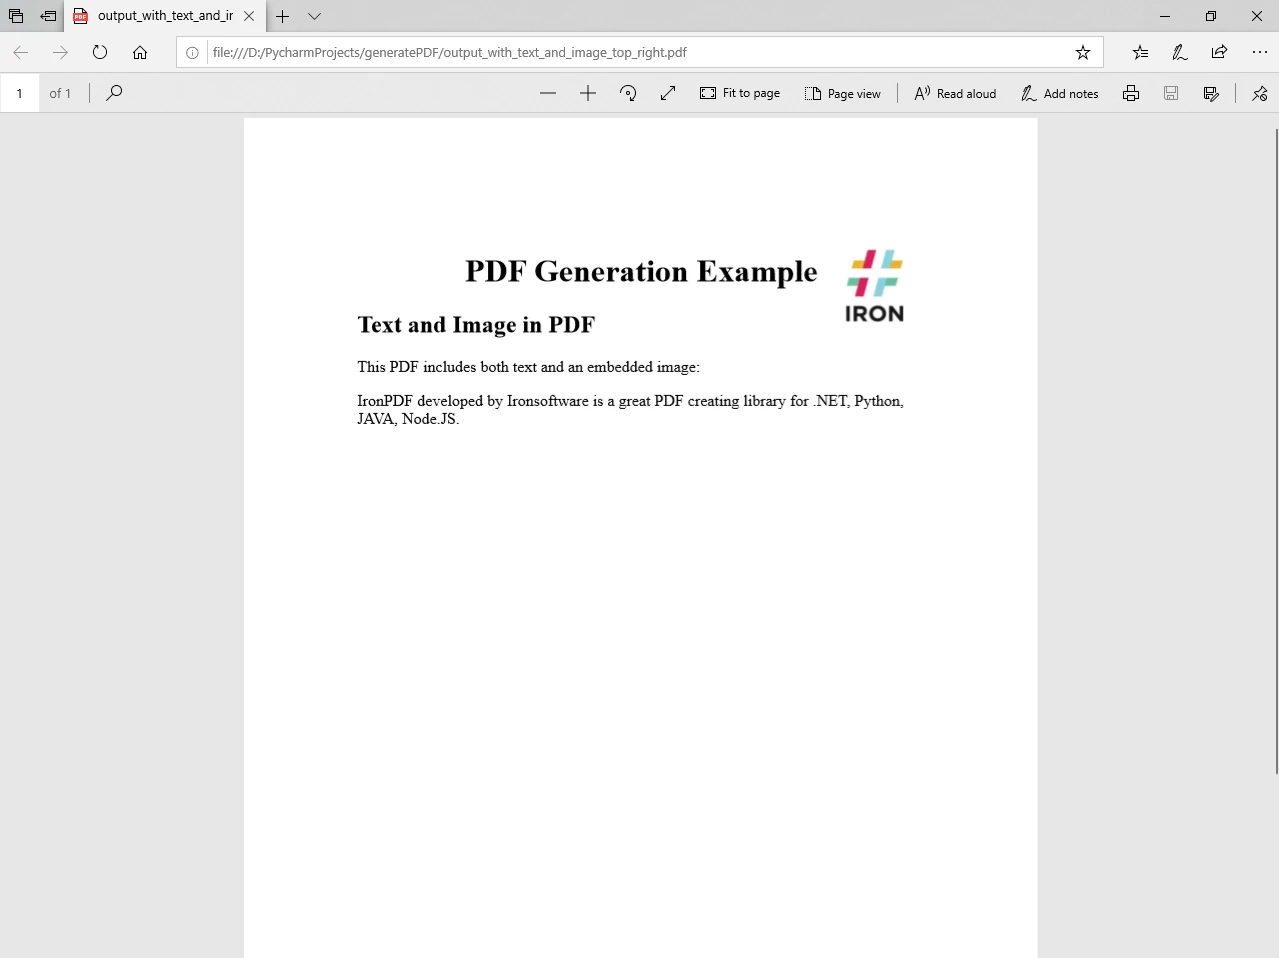 How to Create PDF Files with Text and Images in Python: Figure 4 - OUTPUT: output_with_text_and_image_top_right.pdf